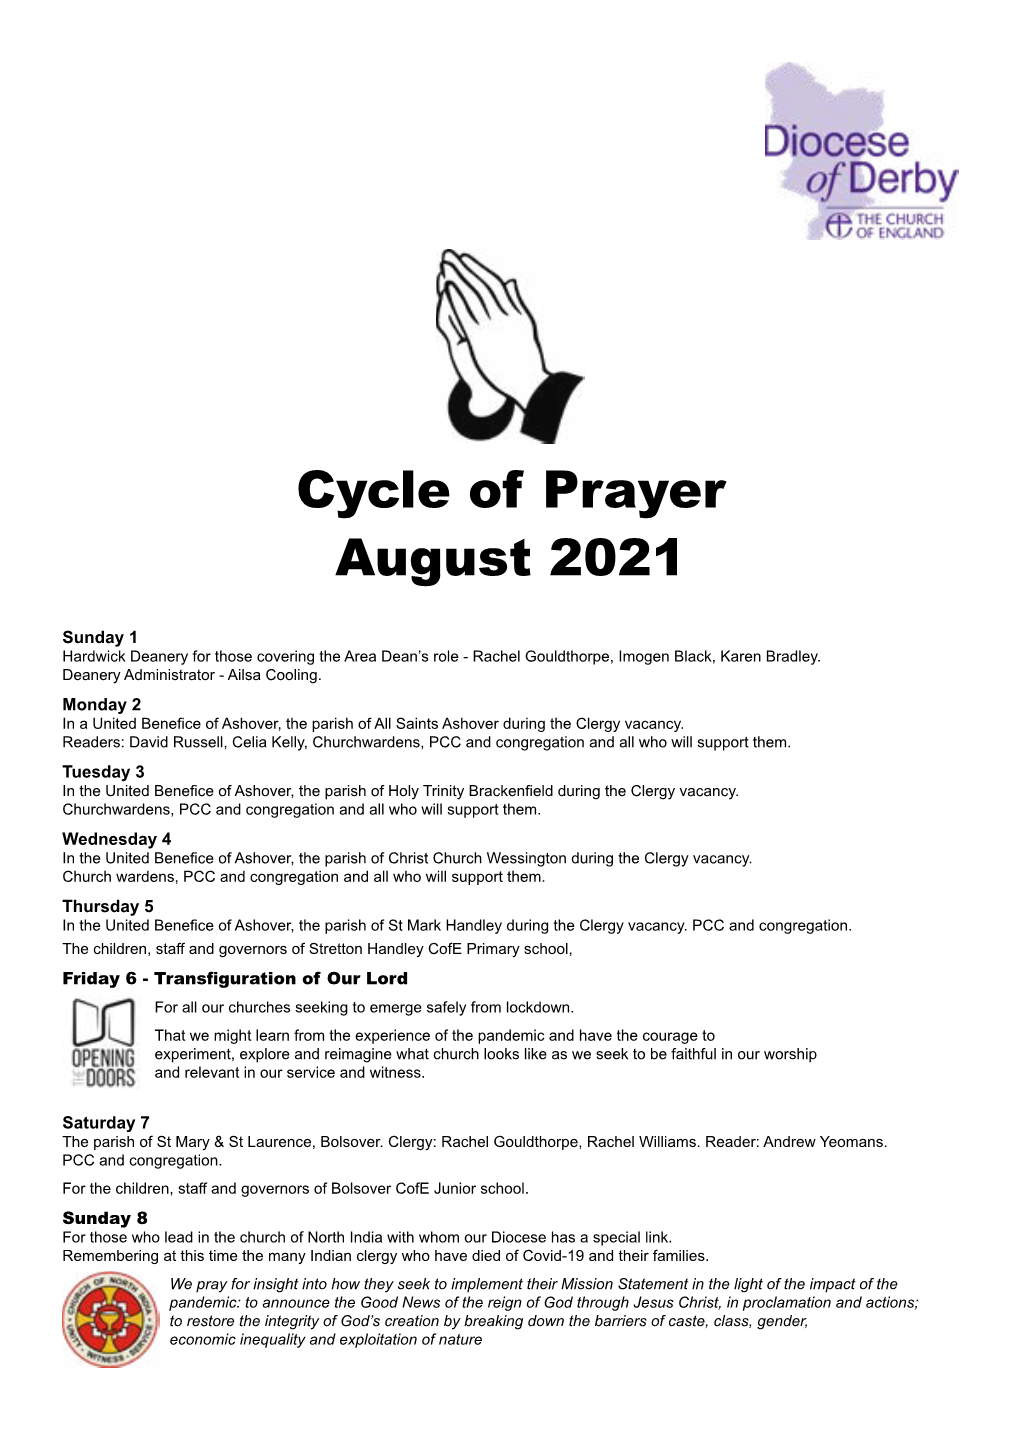 Download the August 2021 Cycle of Prayer